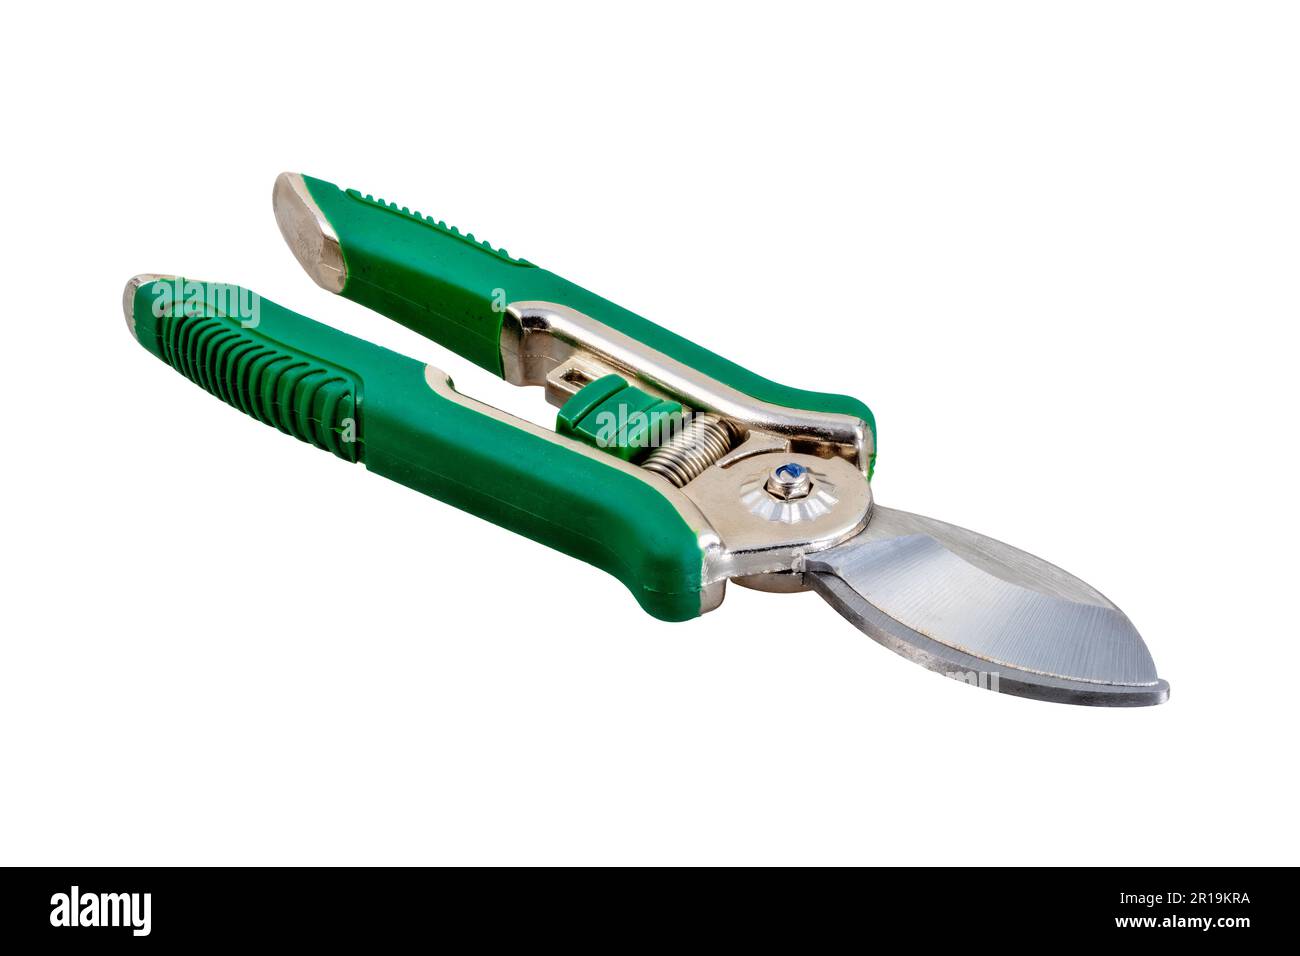 Closeup of an Isolated garden pruner with a green handle Stock Photo